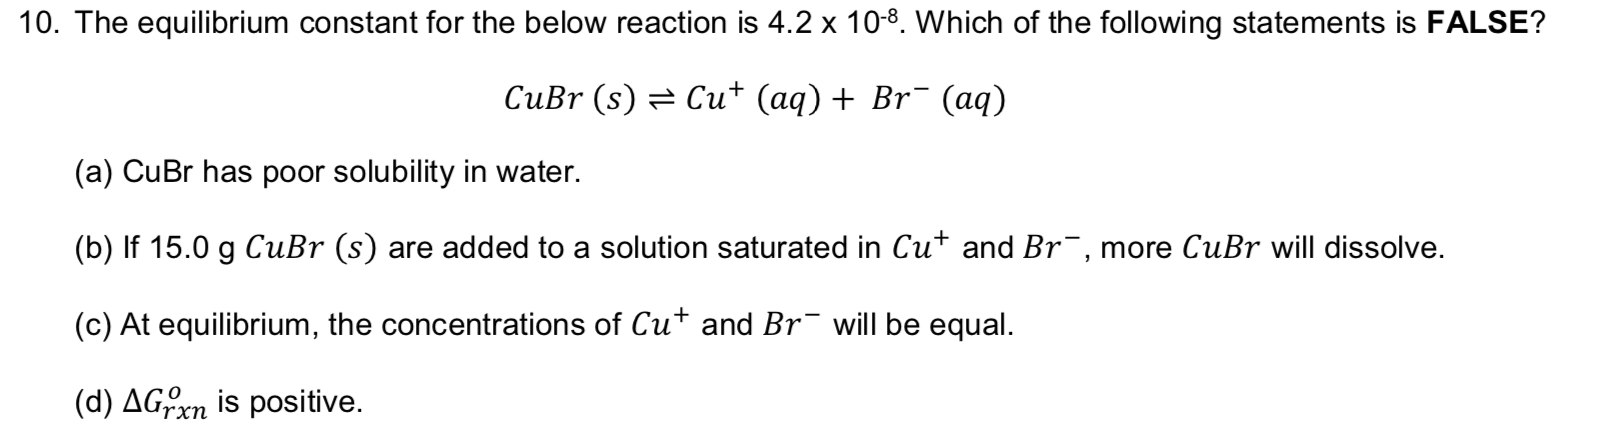 10. The equilibrium constant for the below reaction is 4.2 x 10-8. Which of the following statements is FALSE?
CuBr (s)
Cut (aq) + Br (aq)
(a) CuBr has poor solubility in water.
(b) If 15.0 g CuBr (s) are added to a solution saturated in Cut and Br, more CuBr will dissolve.
(c) At equilibrium, the concentrations of Cut and Br
will be equal.
(d) AGXn is positive
rxn
